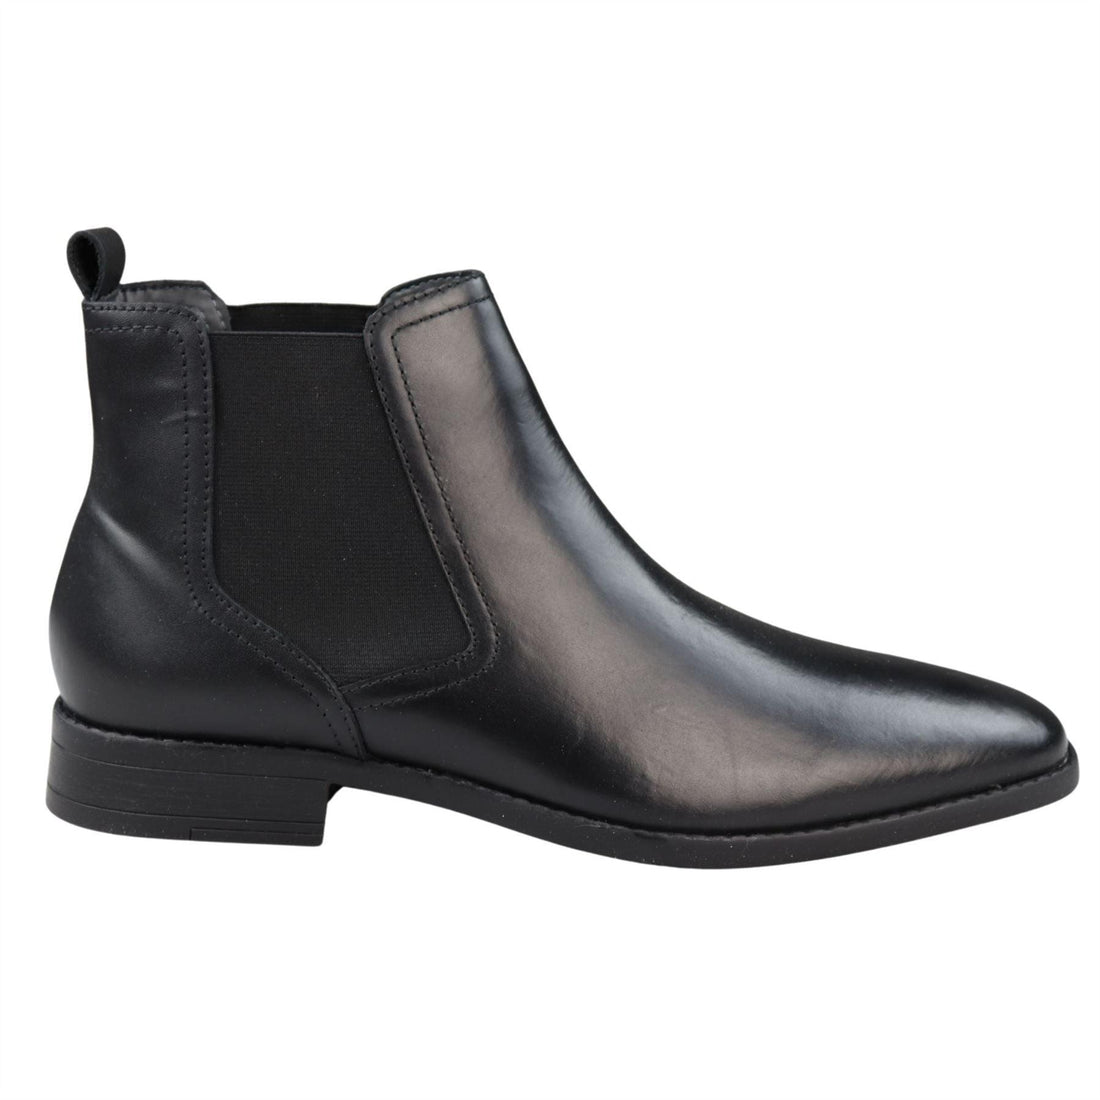 Mens Black Slip On Chelsea Boots Real Leather Smart Casual - Knighthood Store